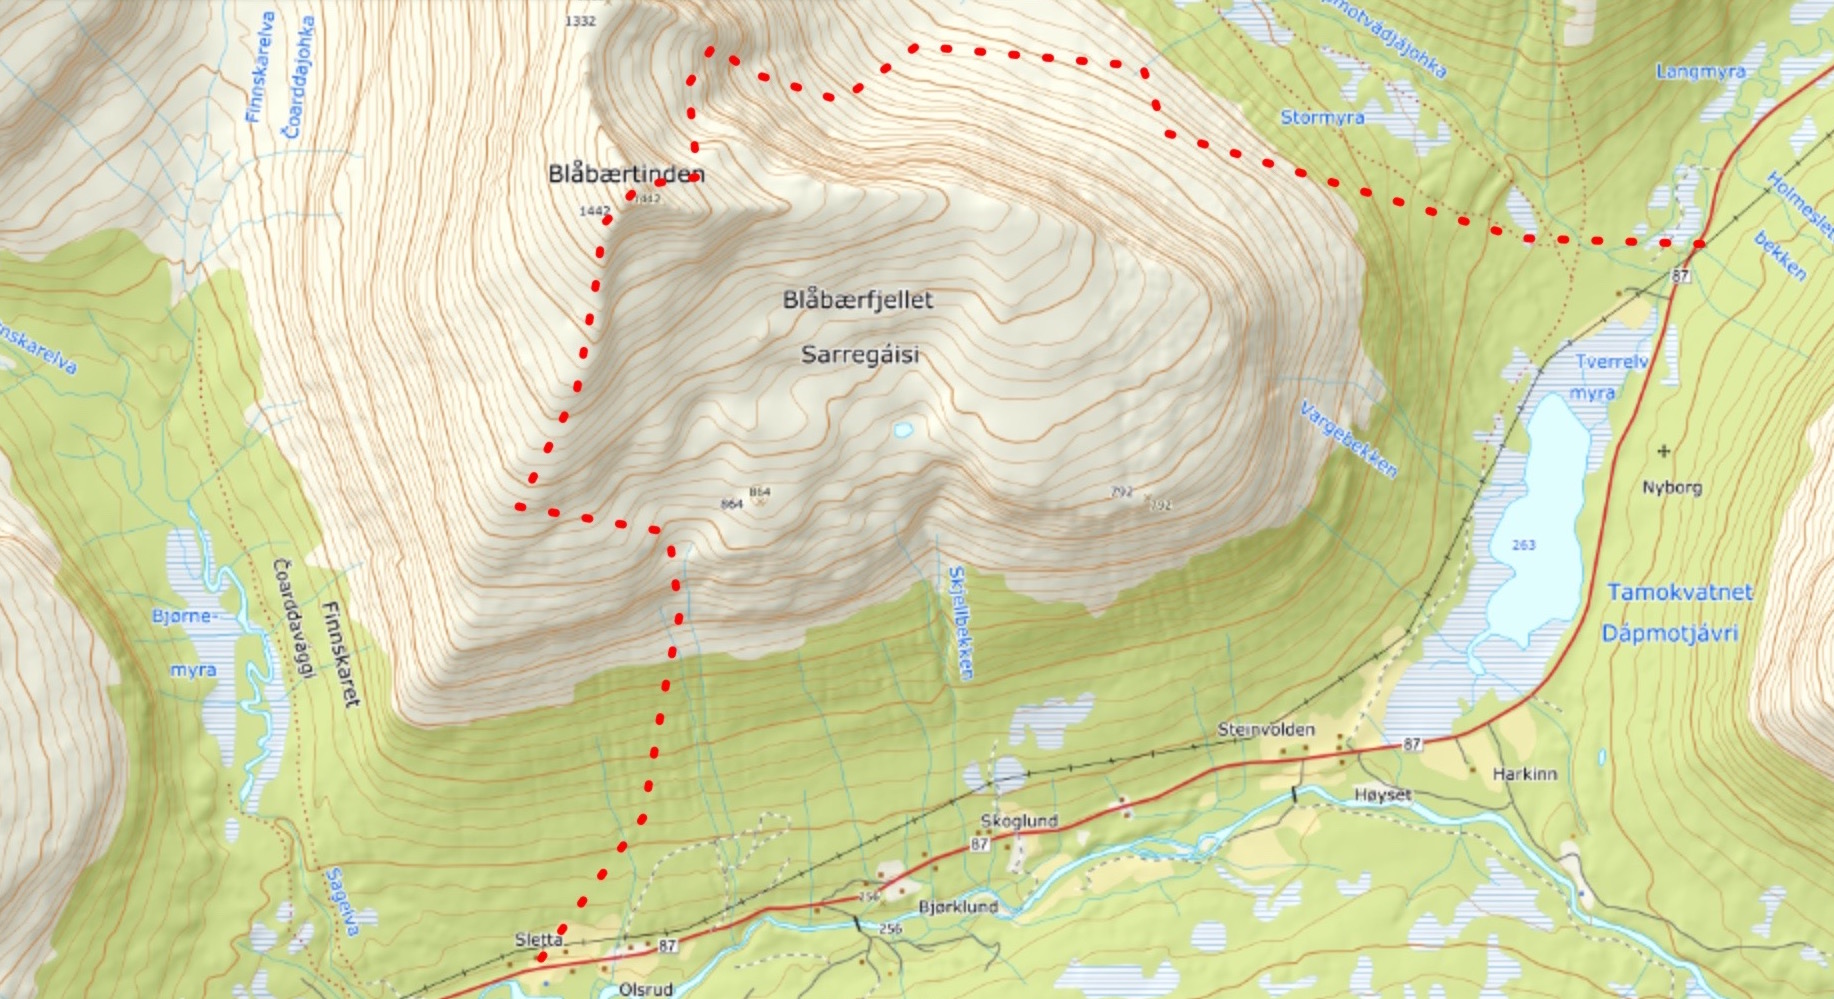 Topo map of the Northeast bowl route on Blåbærfjellet in the Tamokdalen Backcountry